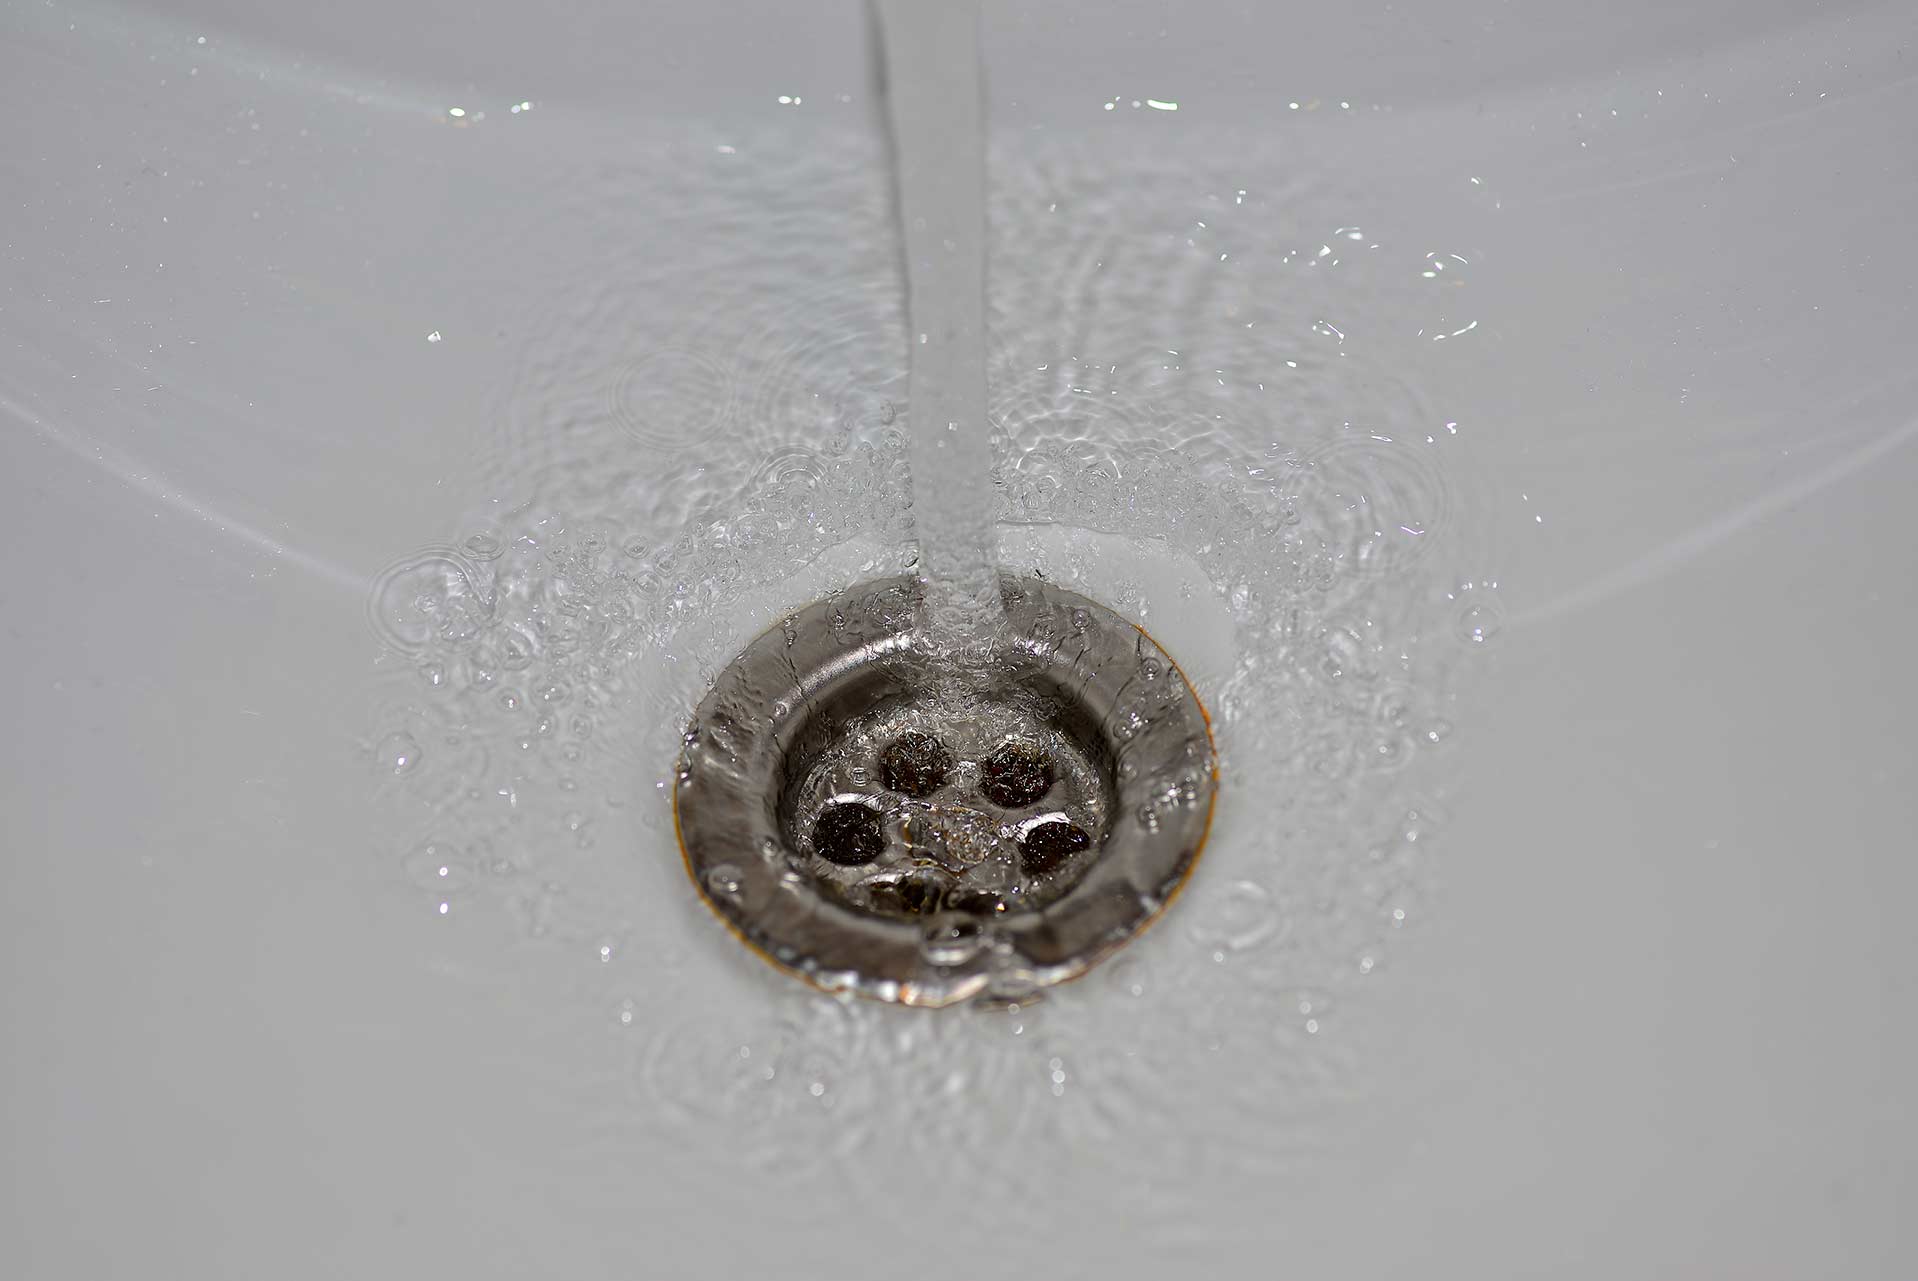 A2B Drains provides services to unblock blocked sinks and drains for properties in Soho.